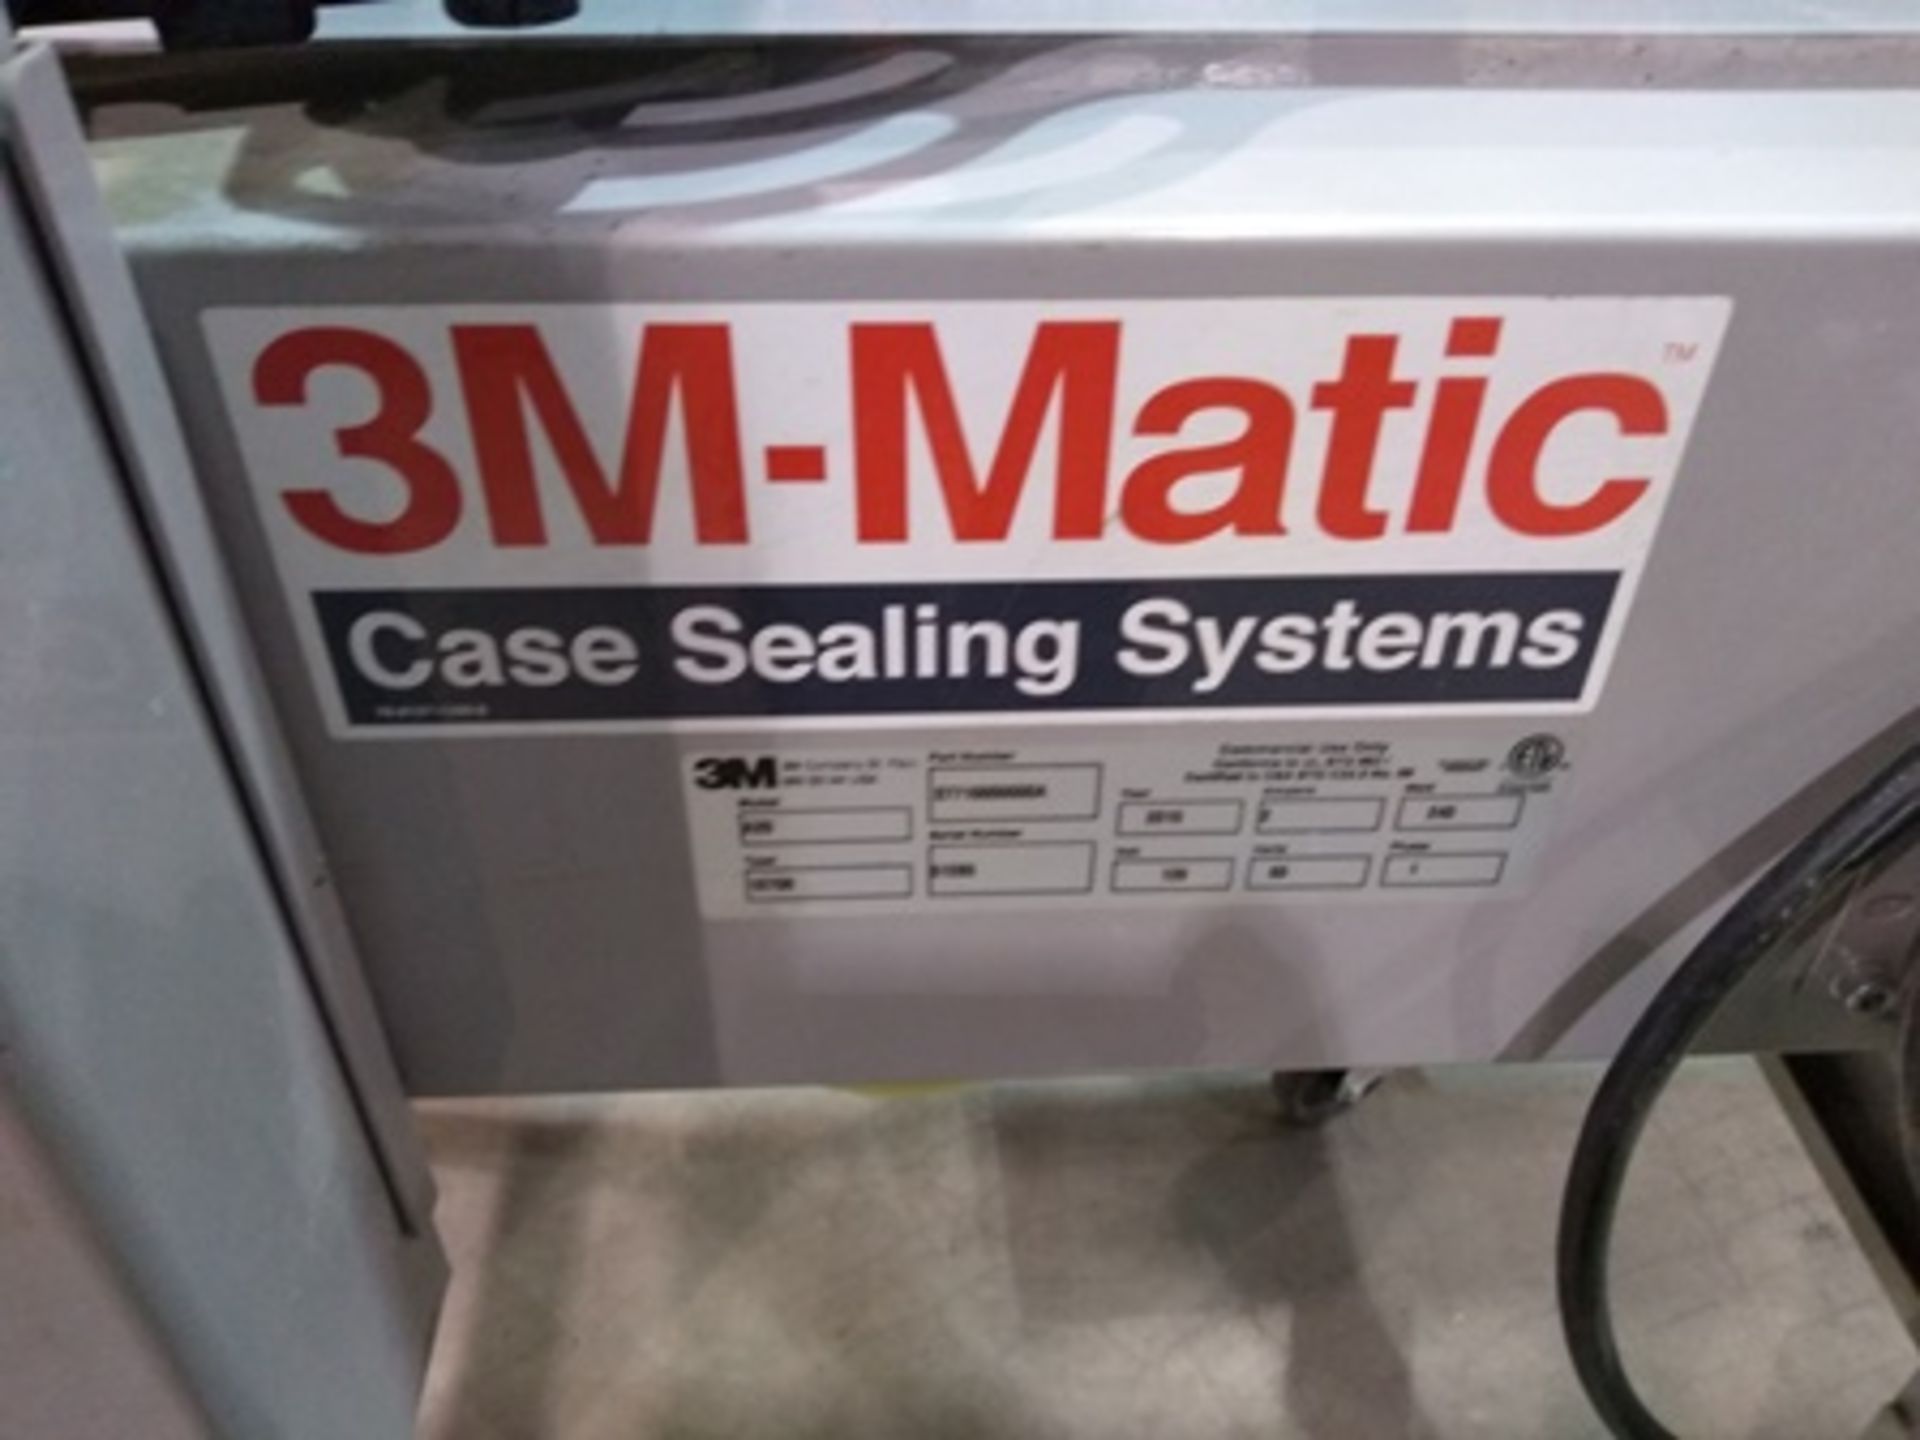 3M-Matic Case Sealing Systems, carton sealing machine mod. A20, serial number 51285, year 2015 … - Image 9 of 29